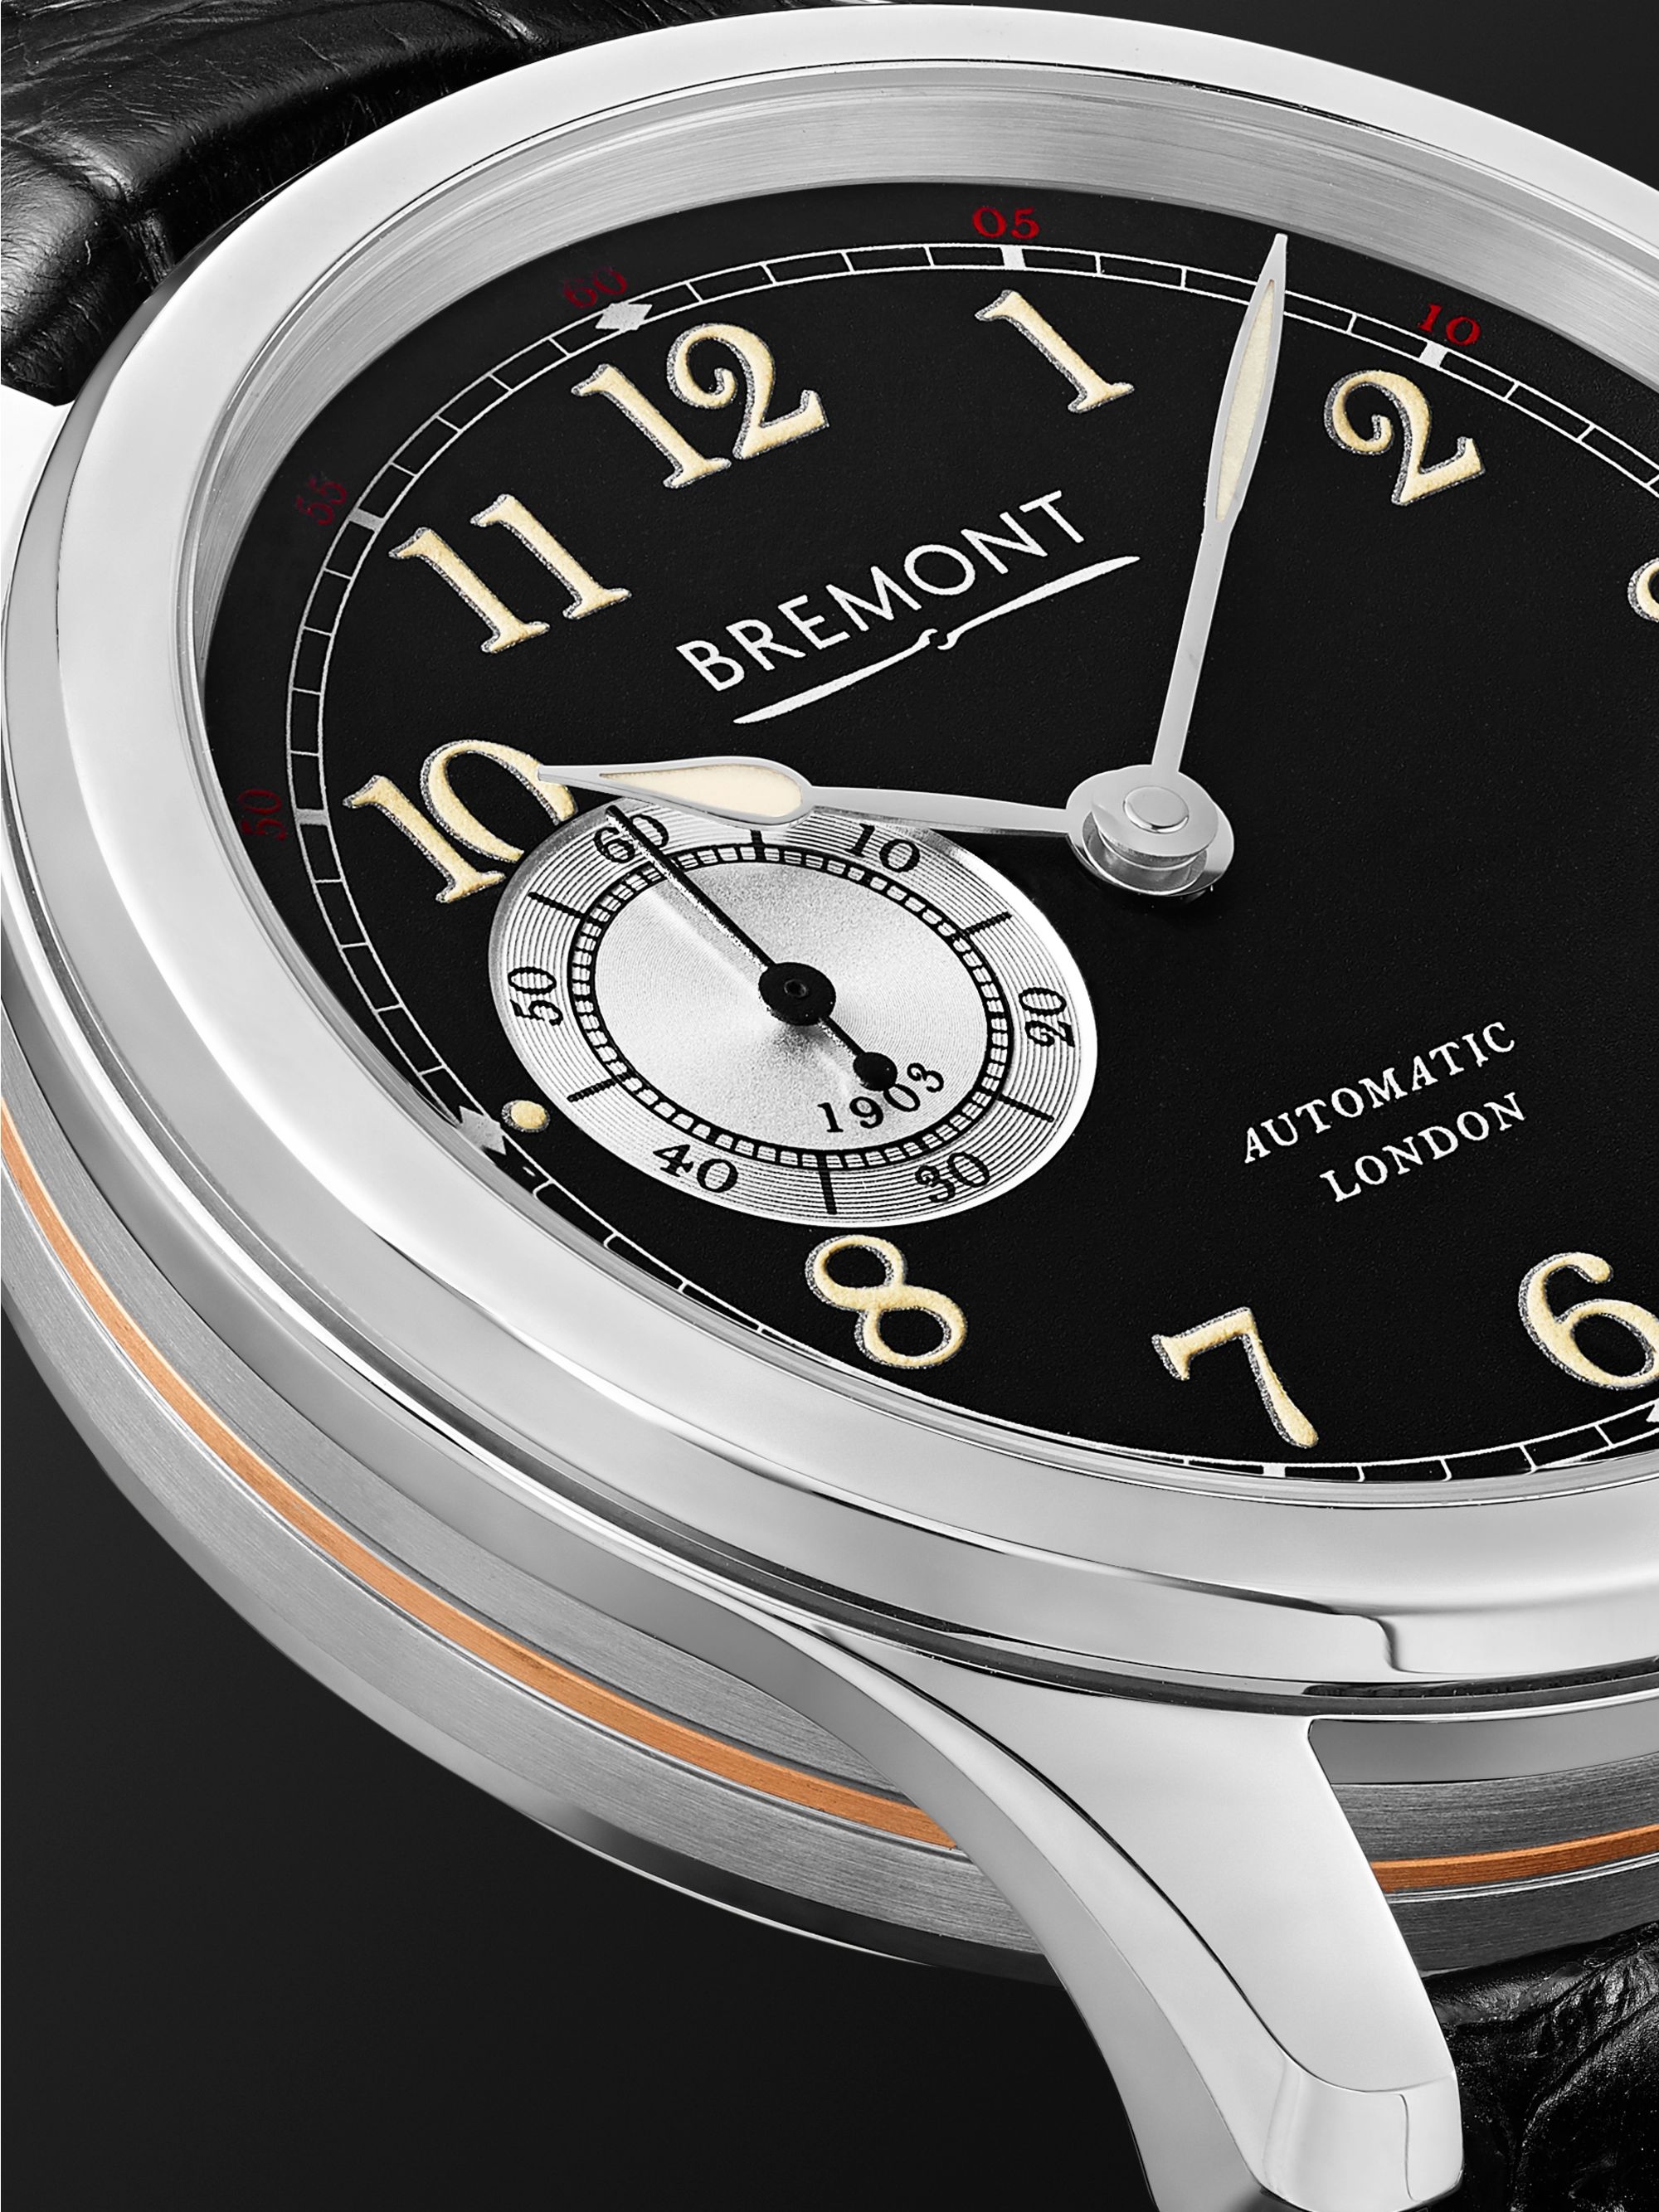 BREMONT Wright Flyer Limited Edition Automatic 43mm Stainless Steel and Leather Watch, Ref. No. WF-SS